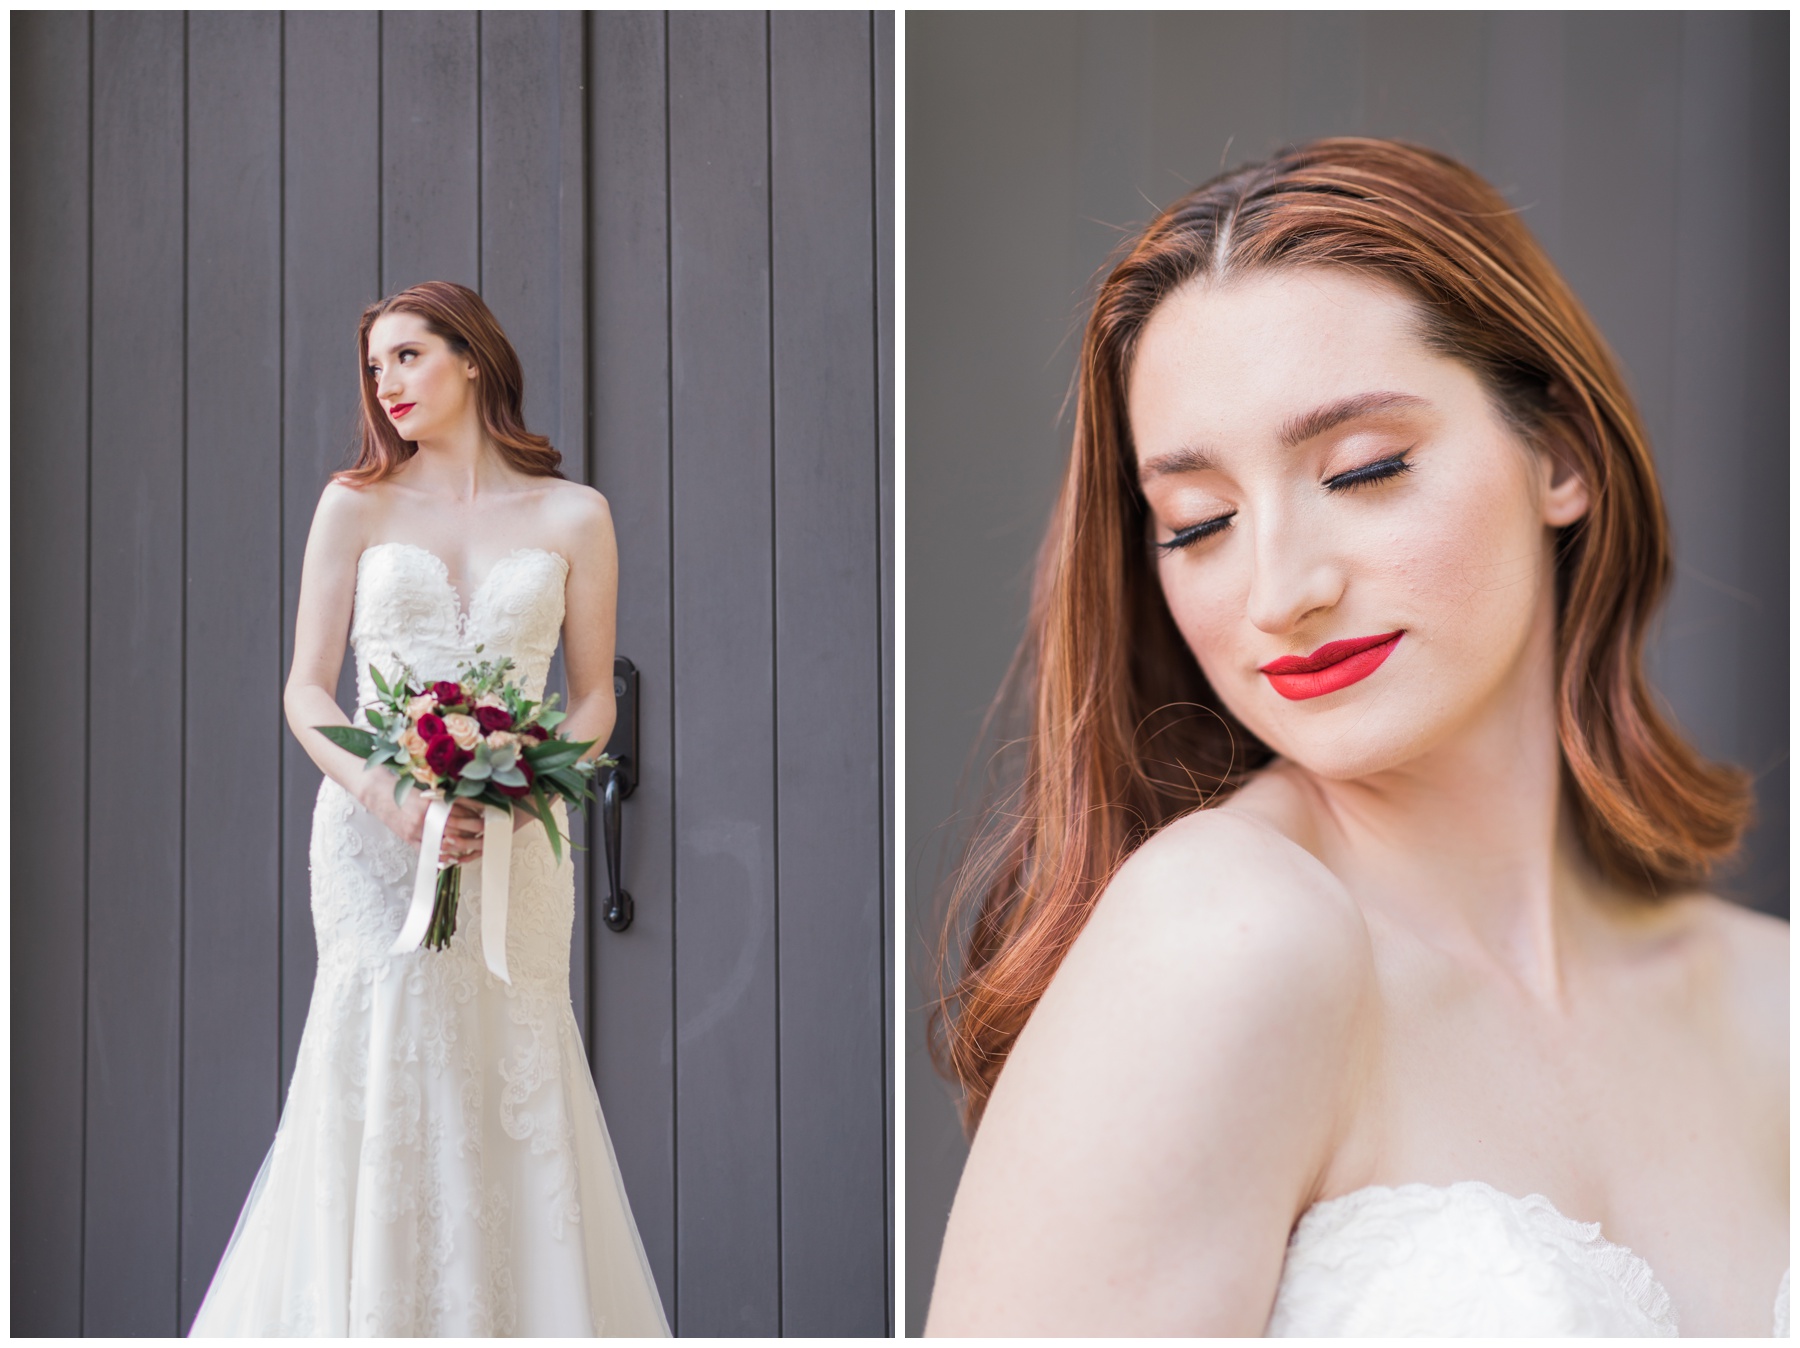 Bridal Session at The Annex in Navasota